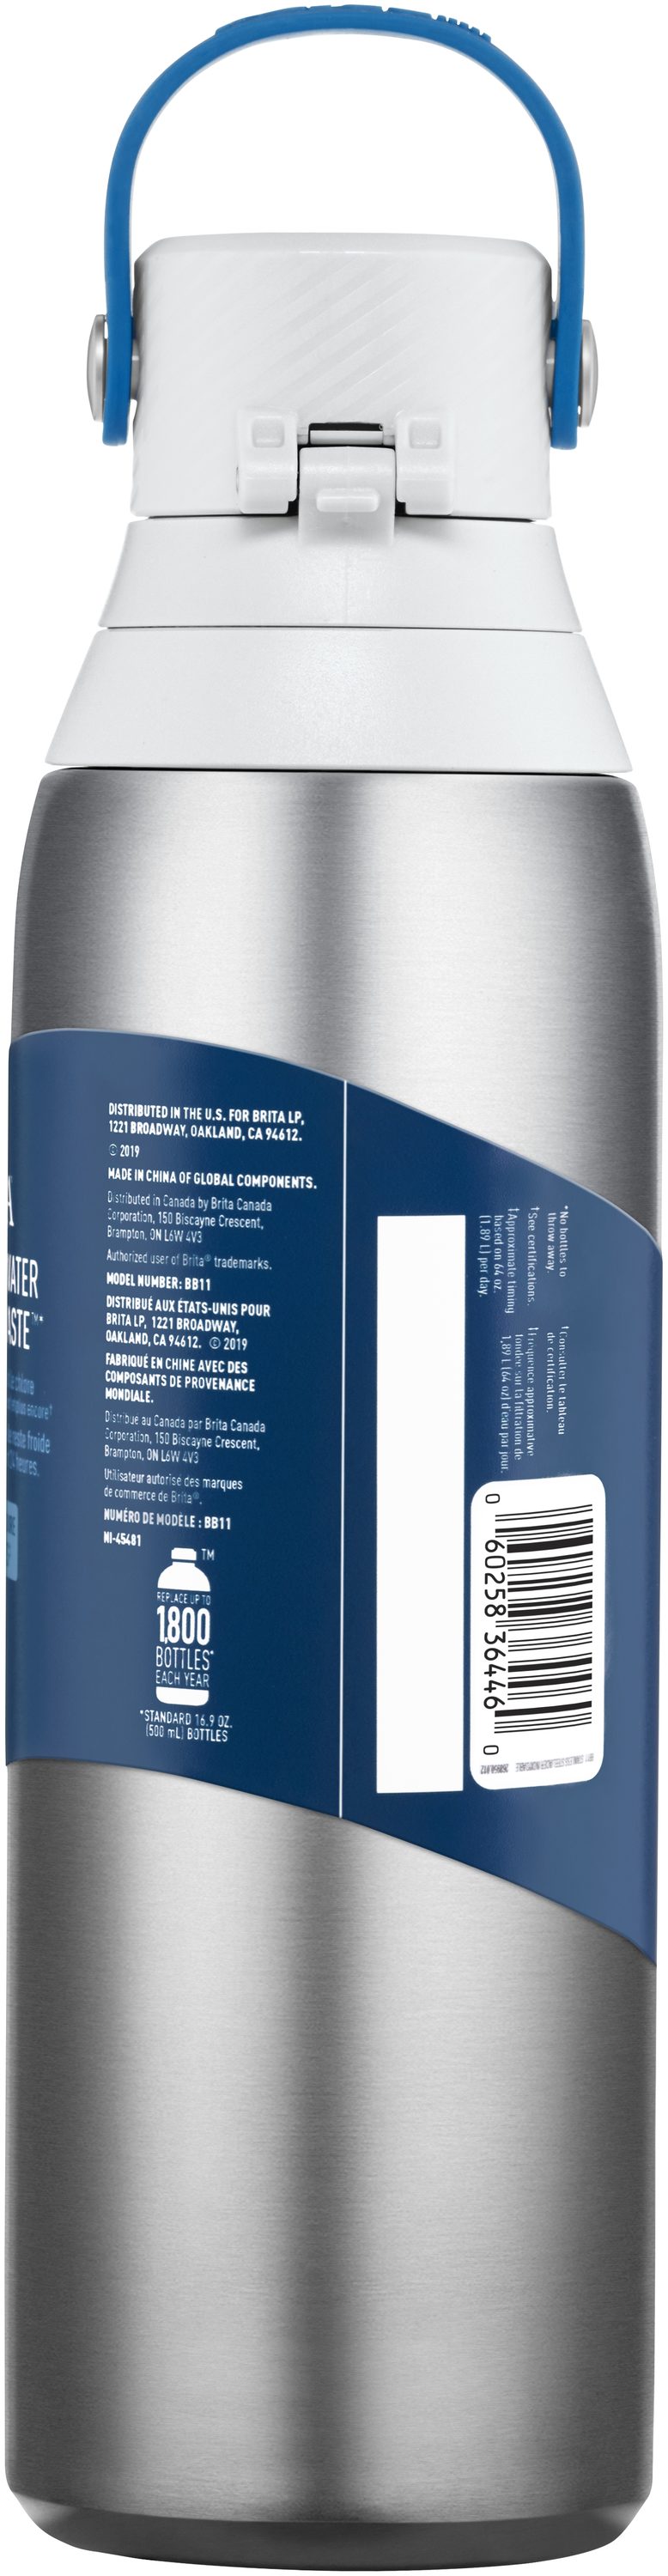  Brita Insulated Filtered Water Bottle with Straw, Reusable,  Stainless Steel Metal, 20 Ounce: Home & Kitchen